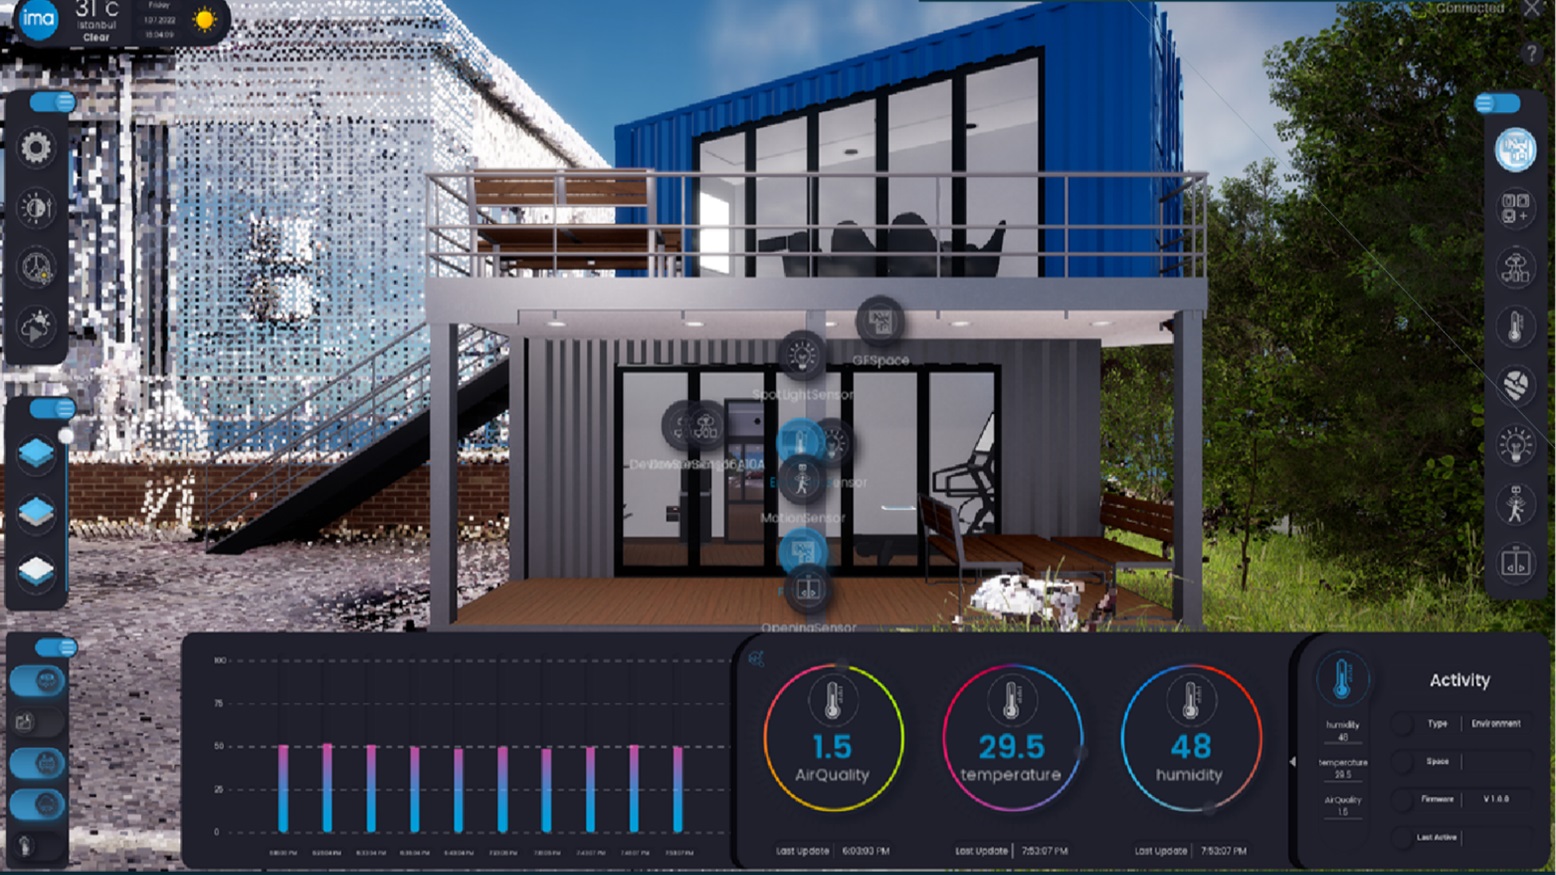 digital construction awards project Dashboard for the digital pods (Image IMA Architects)